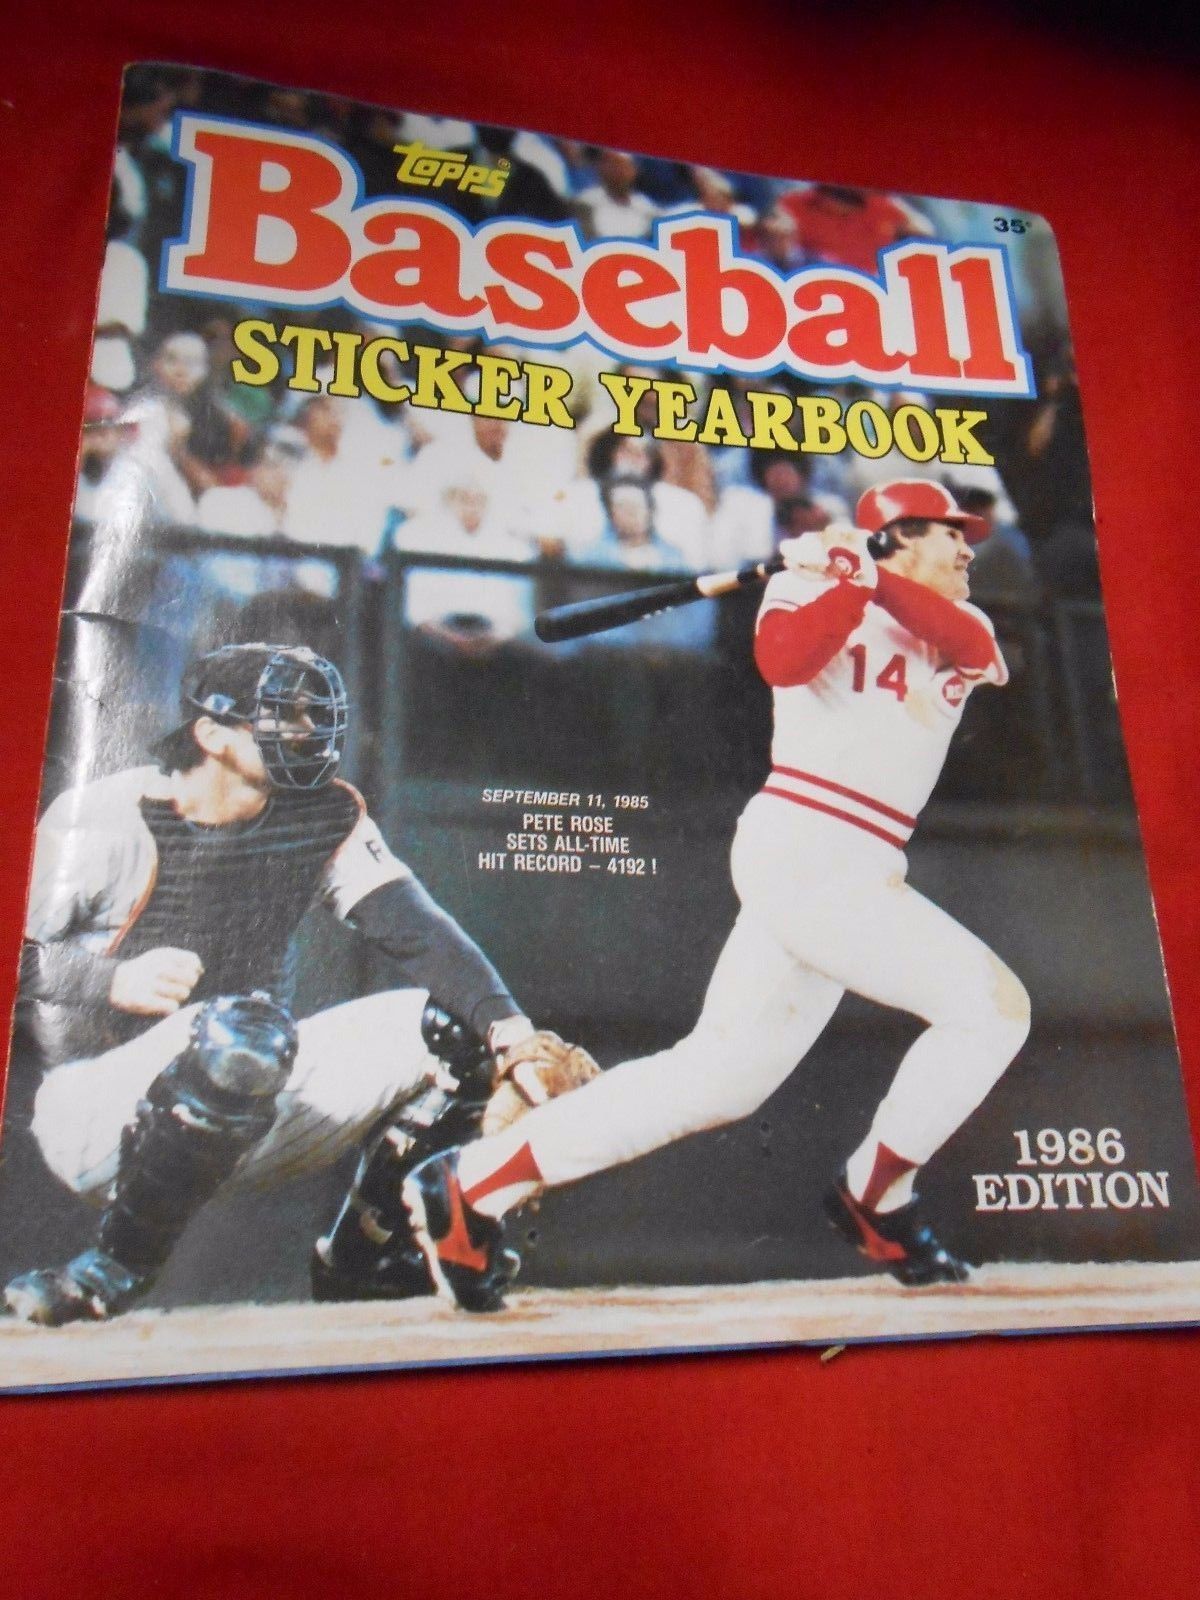 Great Collectible 1986 Topps BASEBALL "Sticker Yearbook" - $8.50